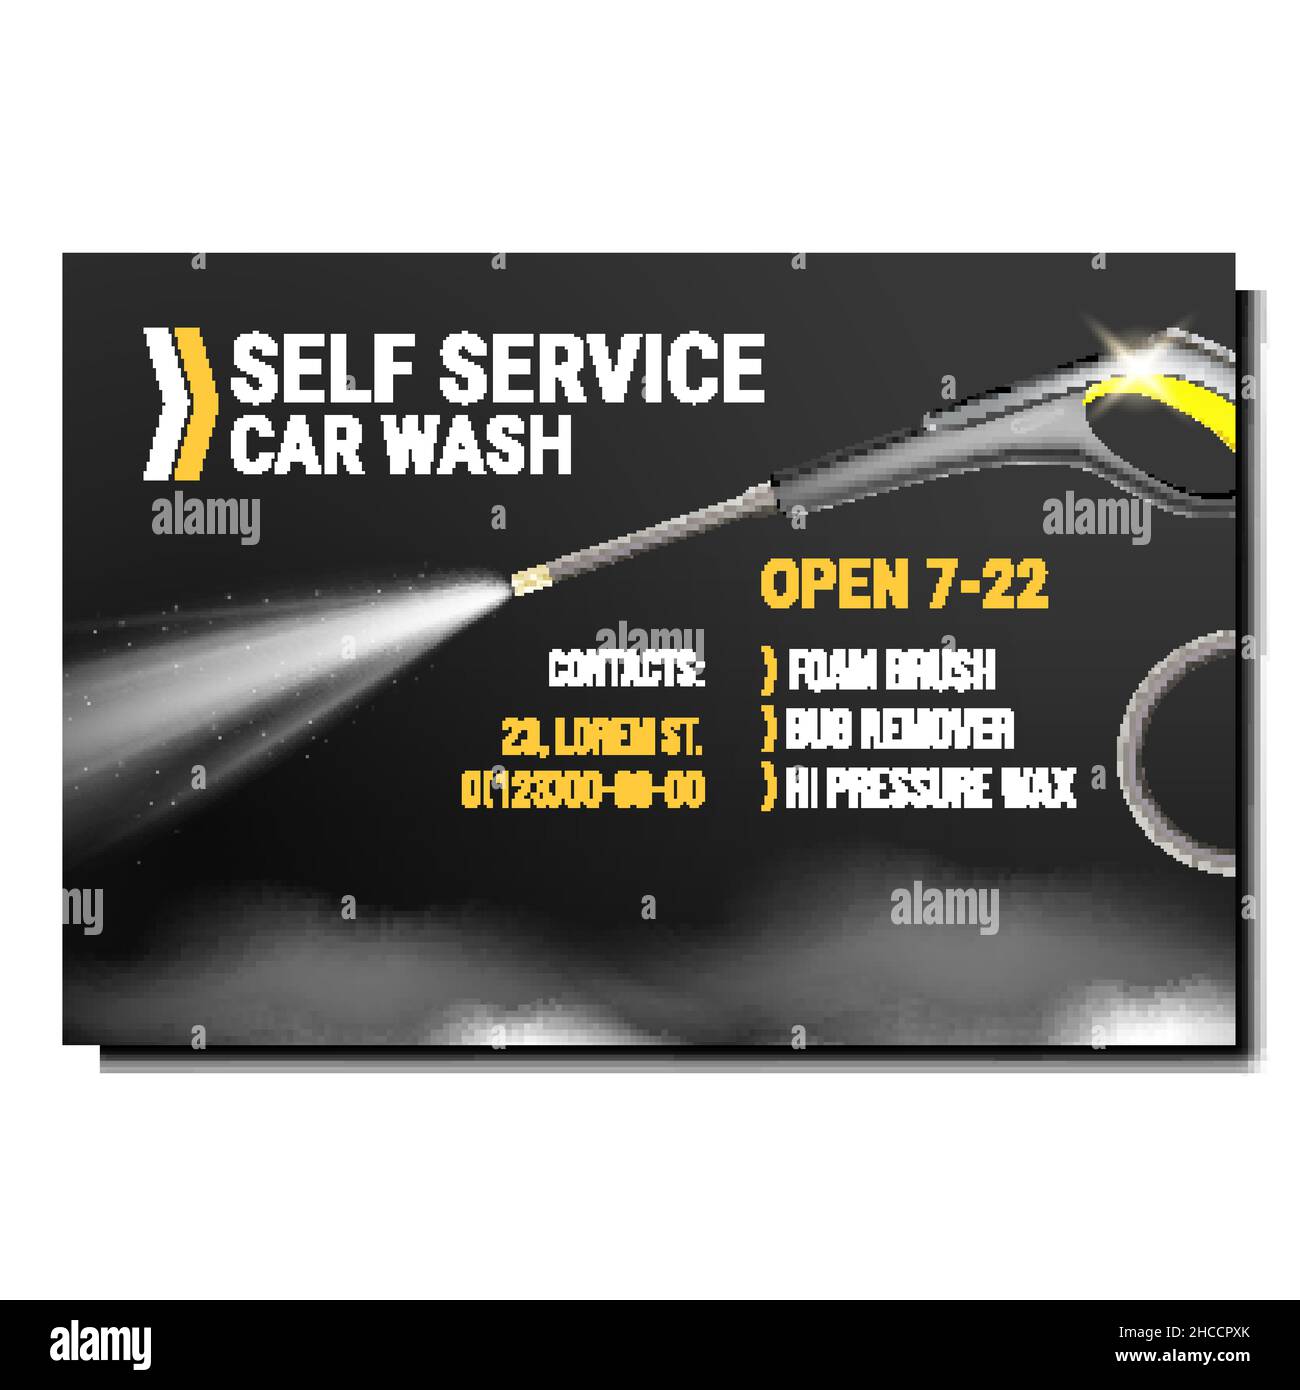 Touchless and automatic car wash service poster Vector Image